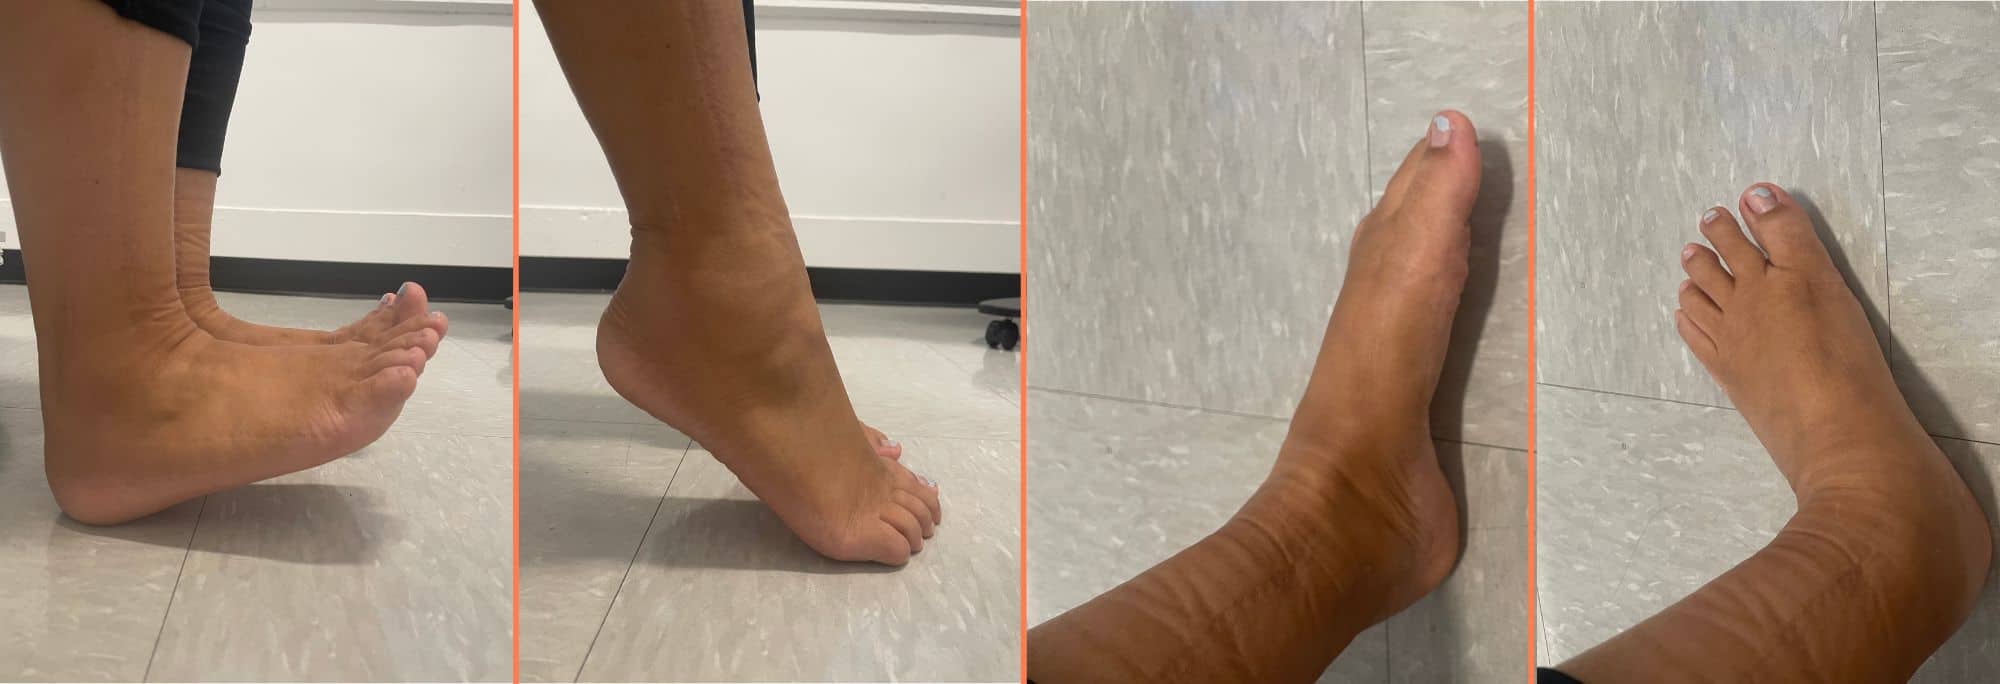 How Can Physical Therapy Help My Ankle? - Body Harmony Physical